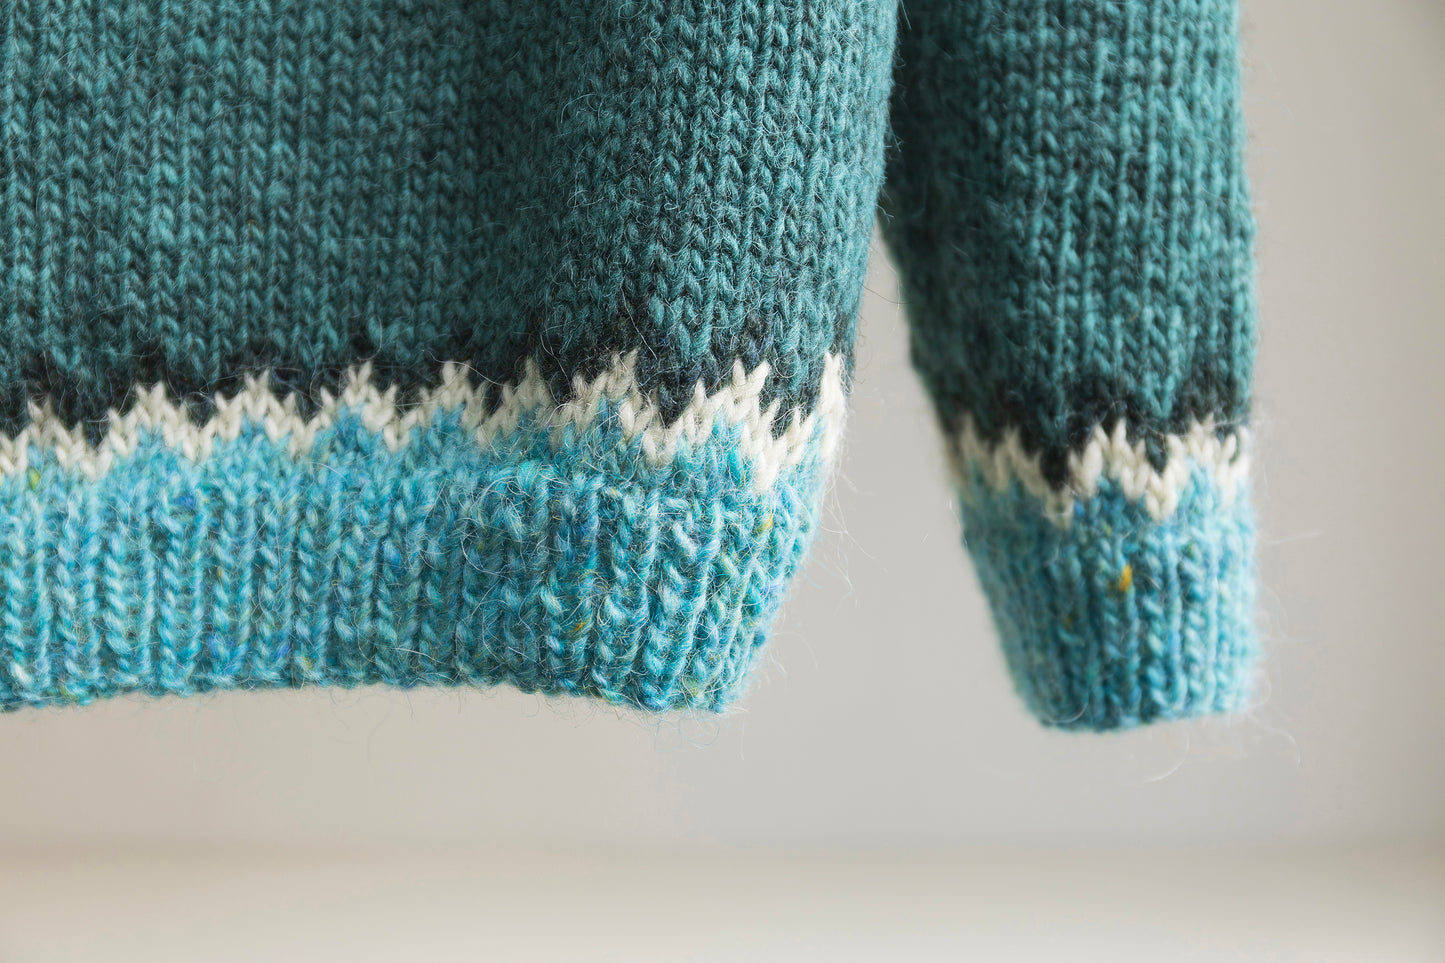 details of turquoise, white and black pure Icelandic wool hand-knitted lopapeysa sweater in Puffins knitting pattern